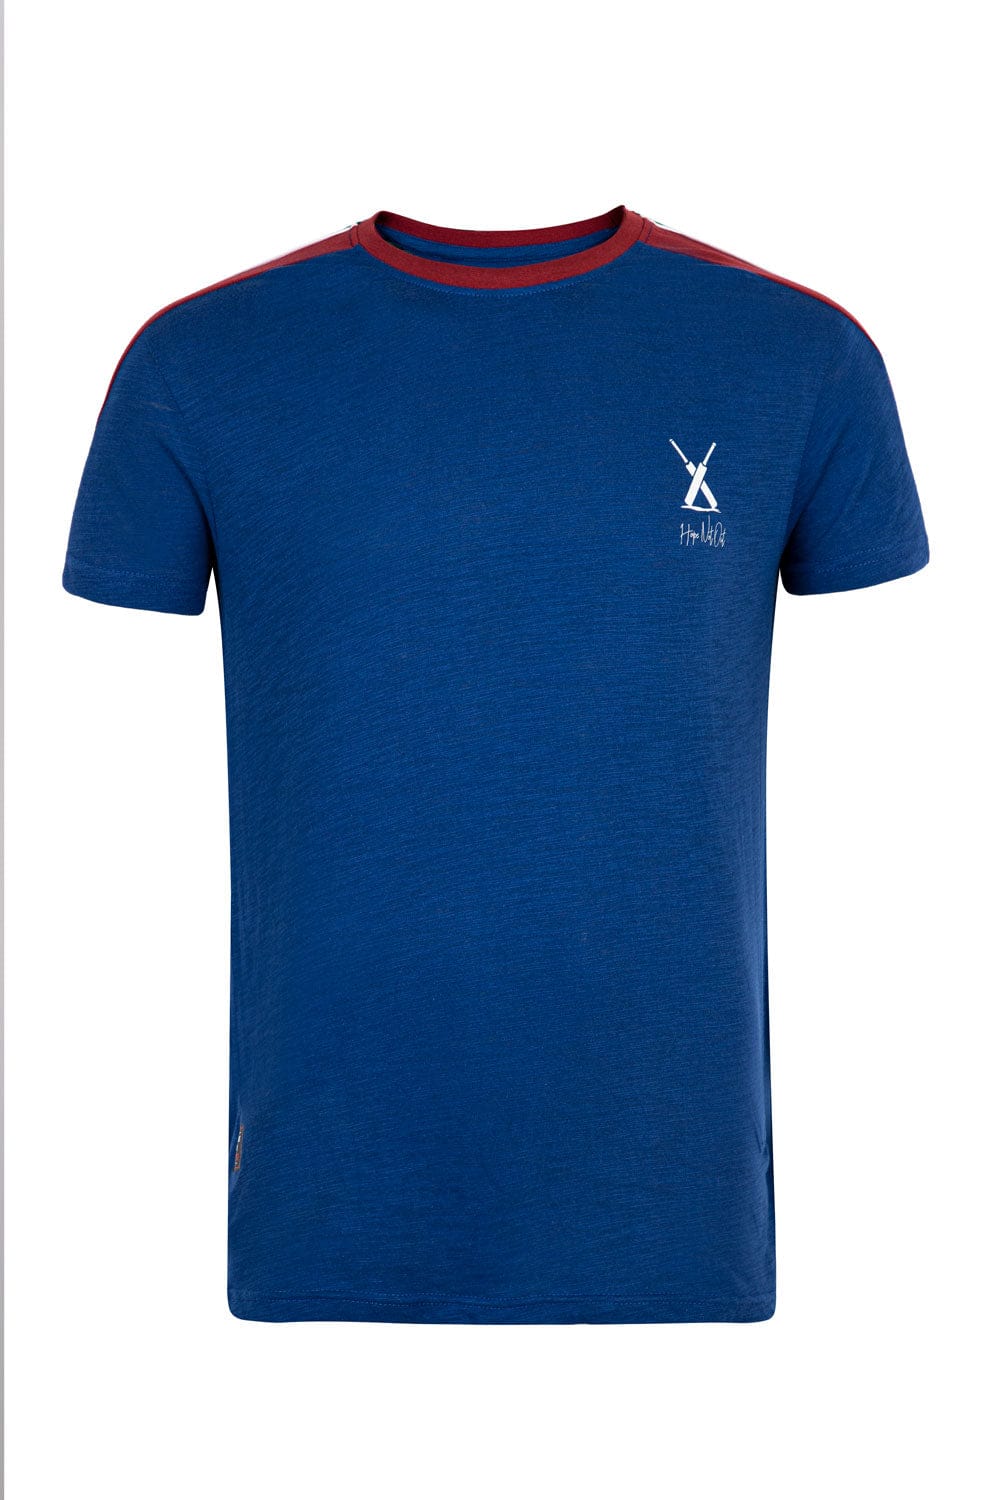 T-Shirt - Ink Blue T-Shirt - HOPE NOT OUT by Shahid Afridi